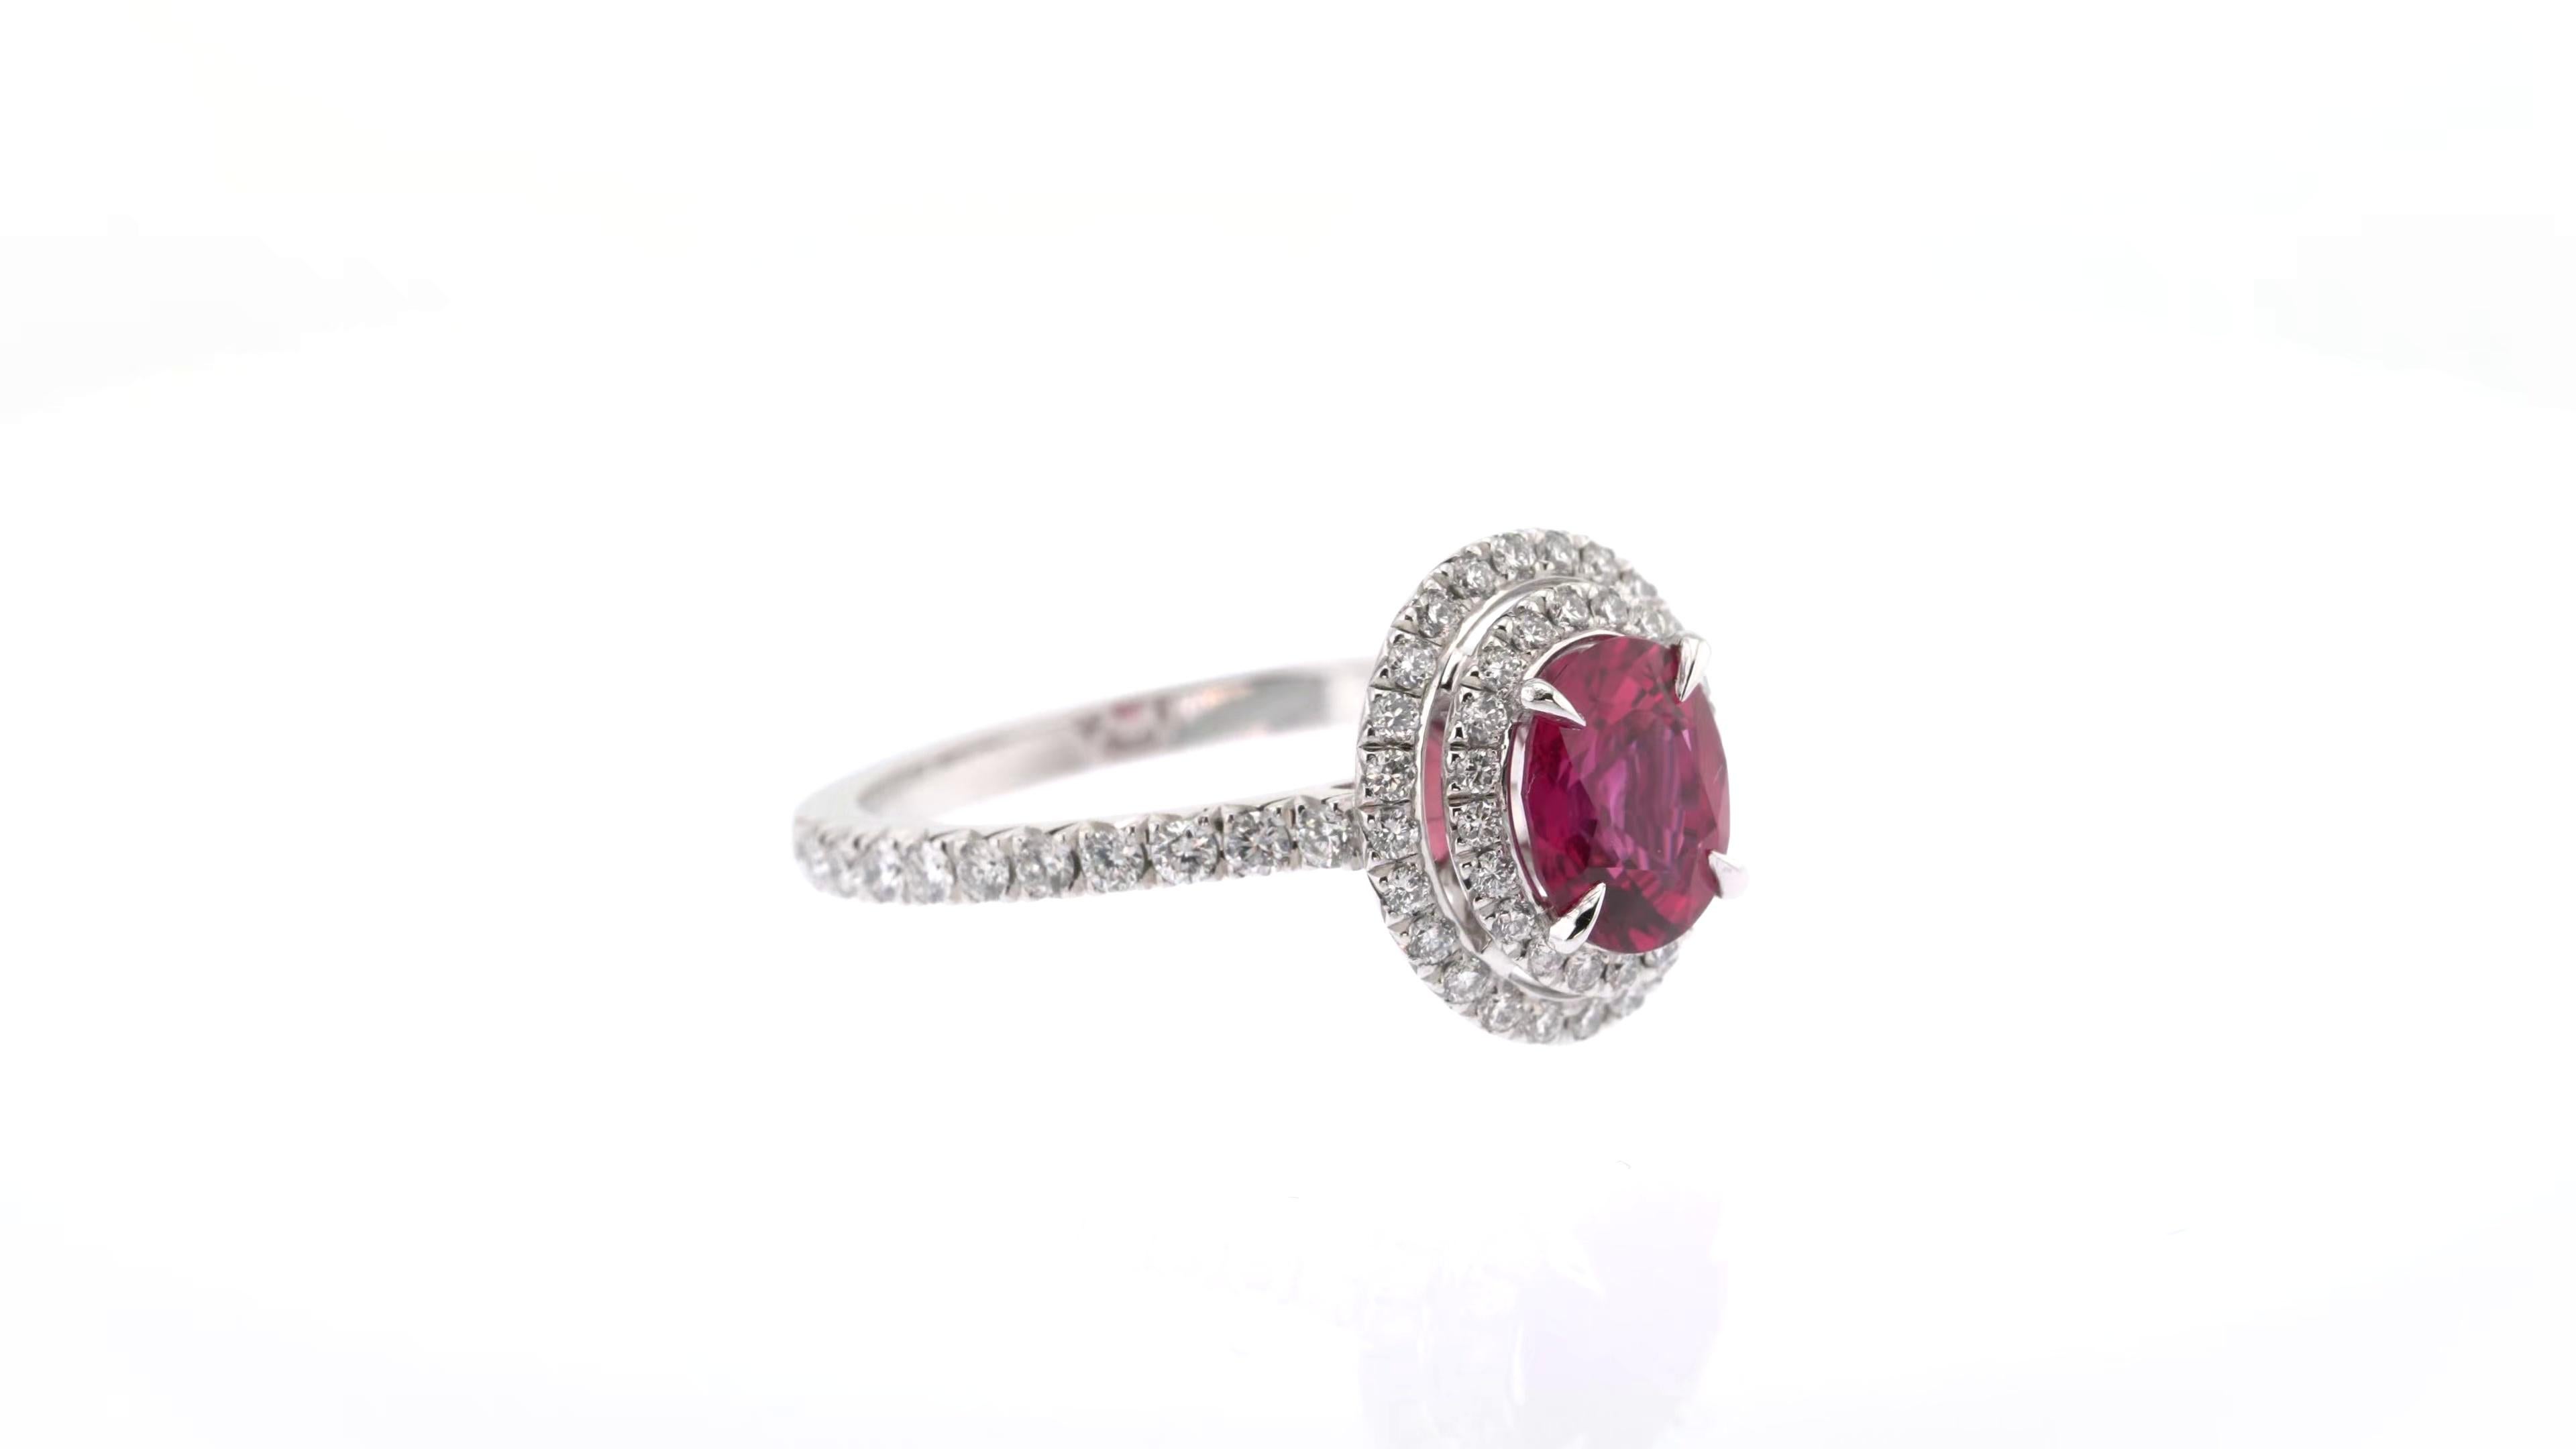 Delicate yet full of life, this elegant ring is made extraordinary by its double halo of white diamonds, which makes it shine as brightly as its wearer. The vivid red ruby at its centre is cut in a classic oval shape and its dazzling diamond